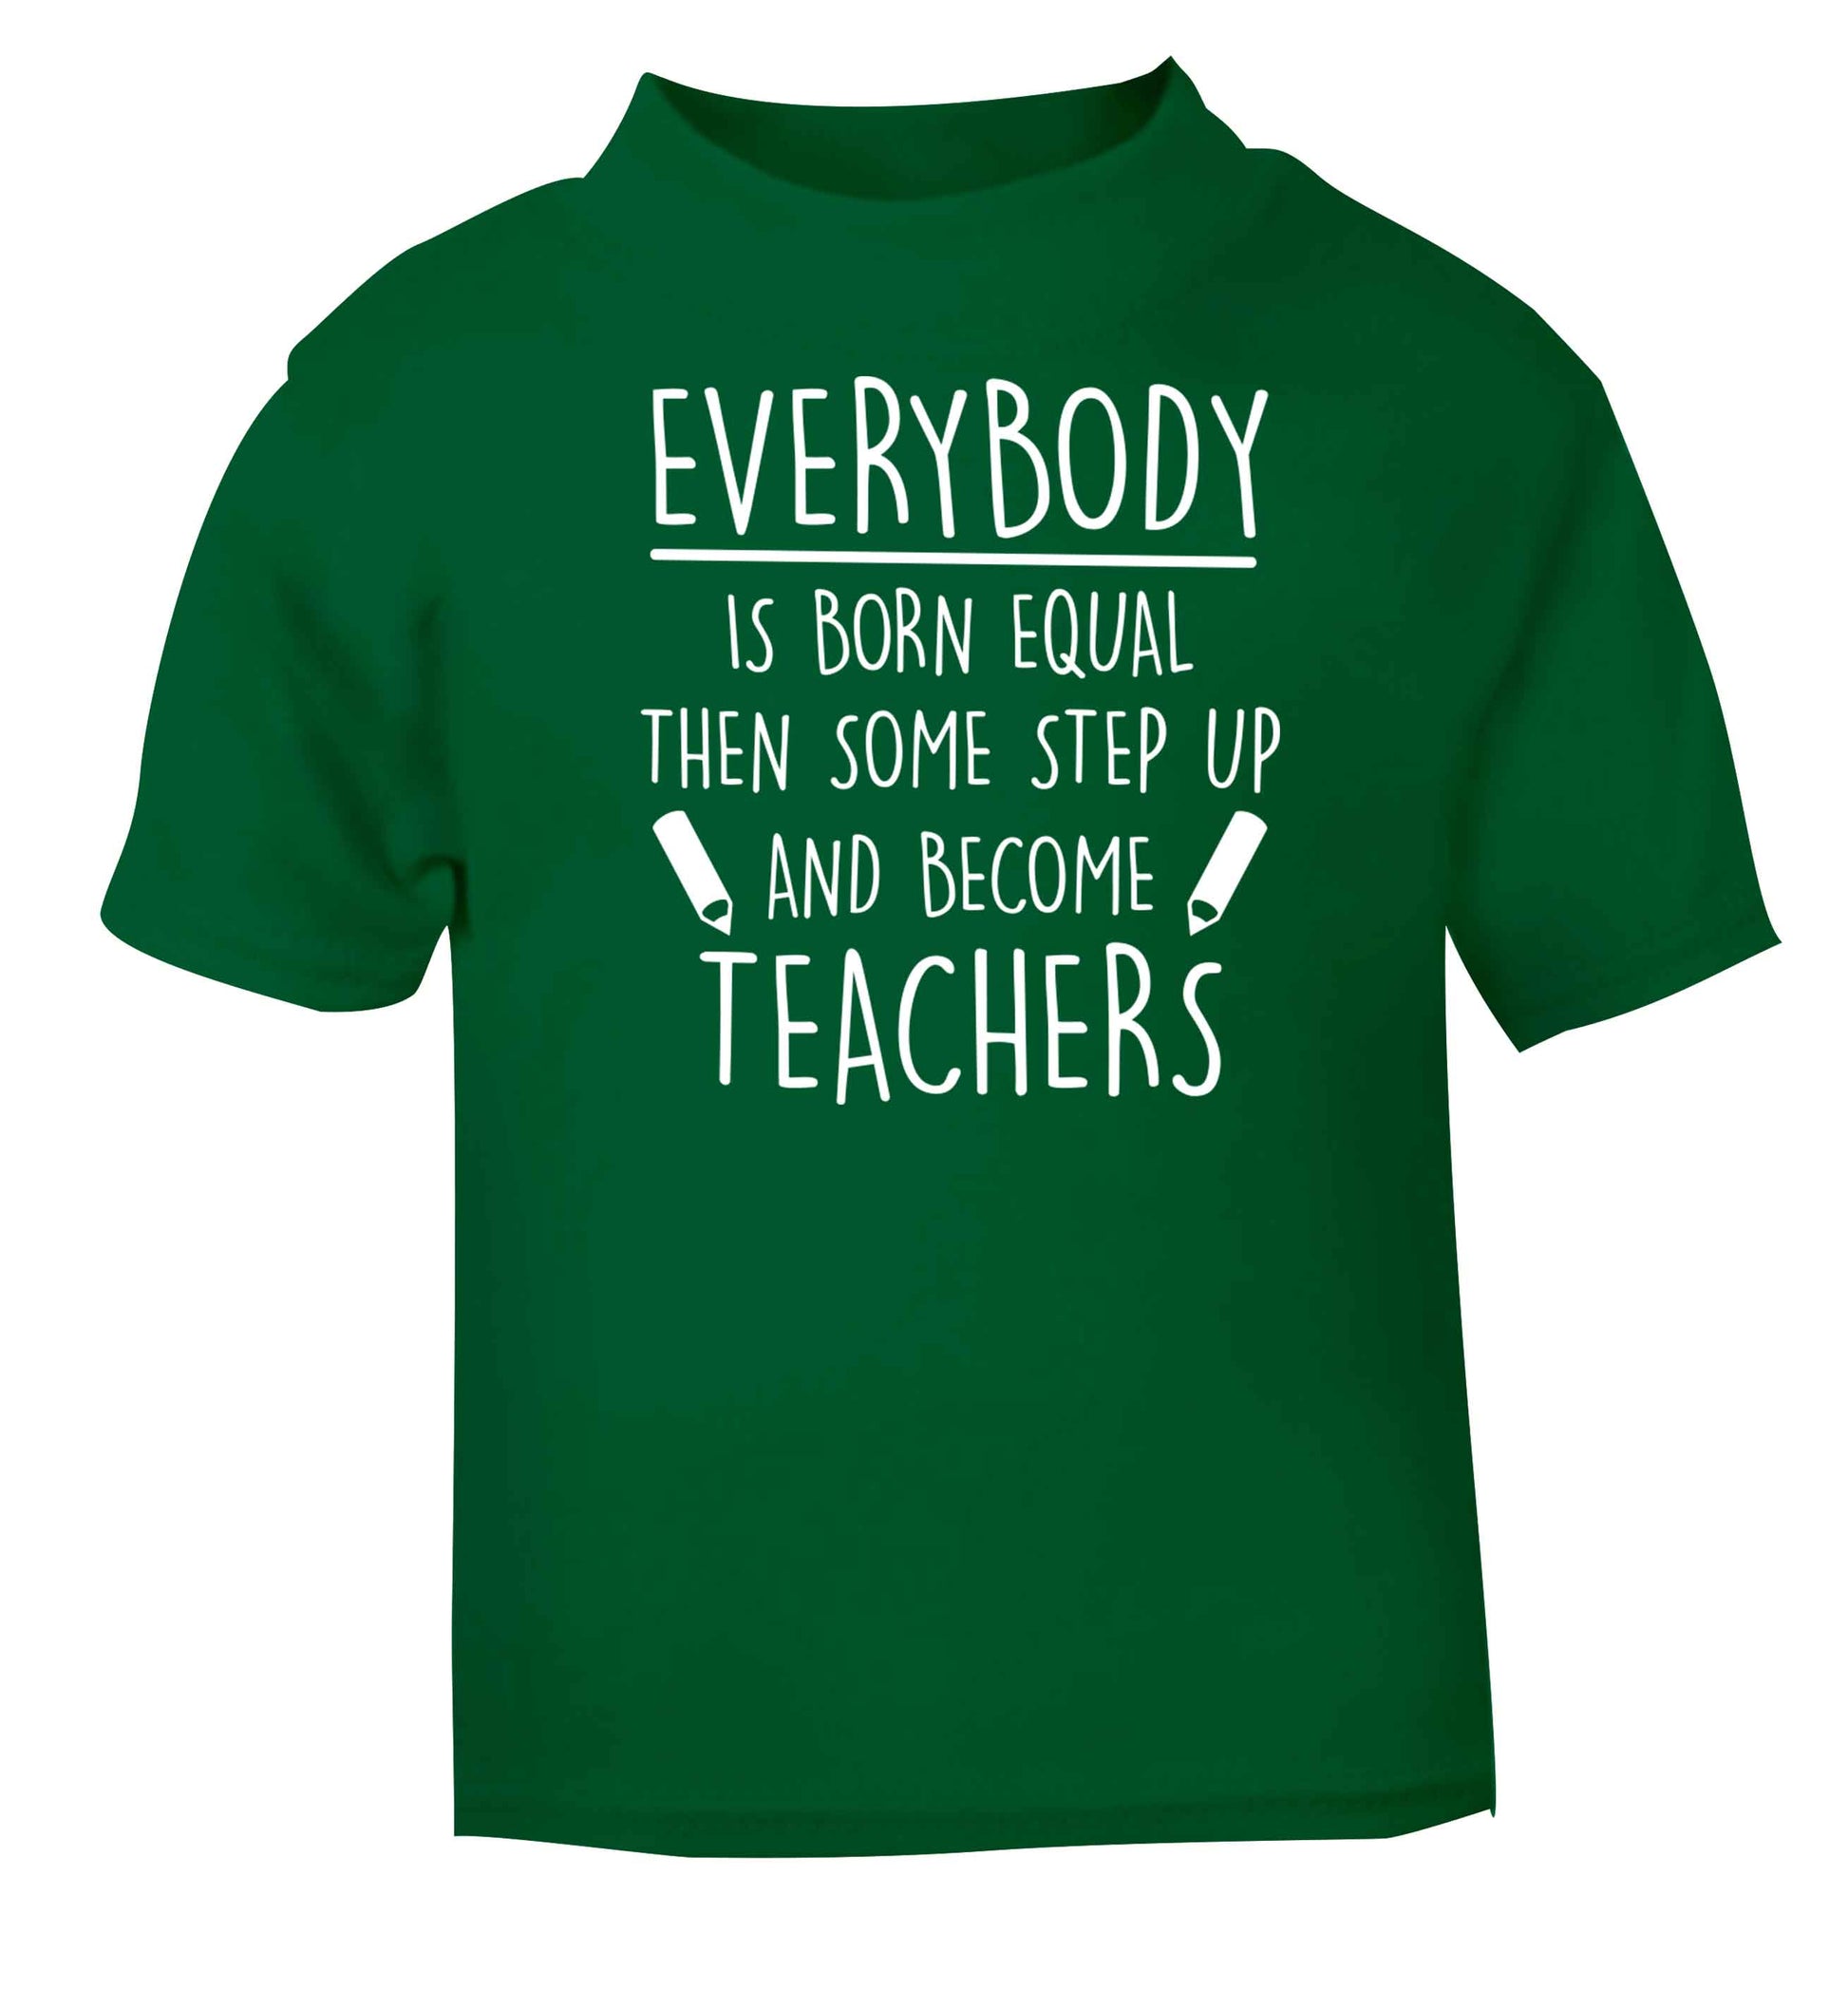 Everybody is born equal then some step up and become teachers green baby toddler Tshirt 2 Years